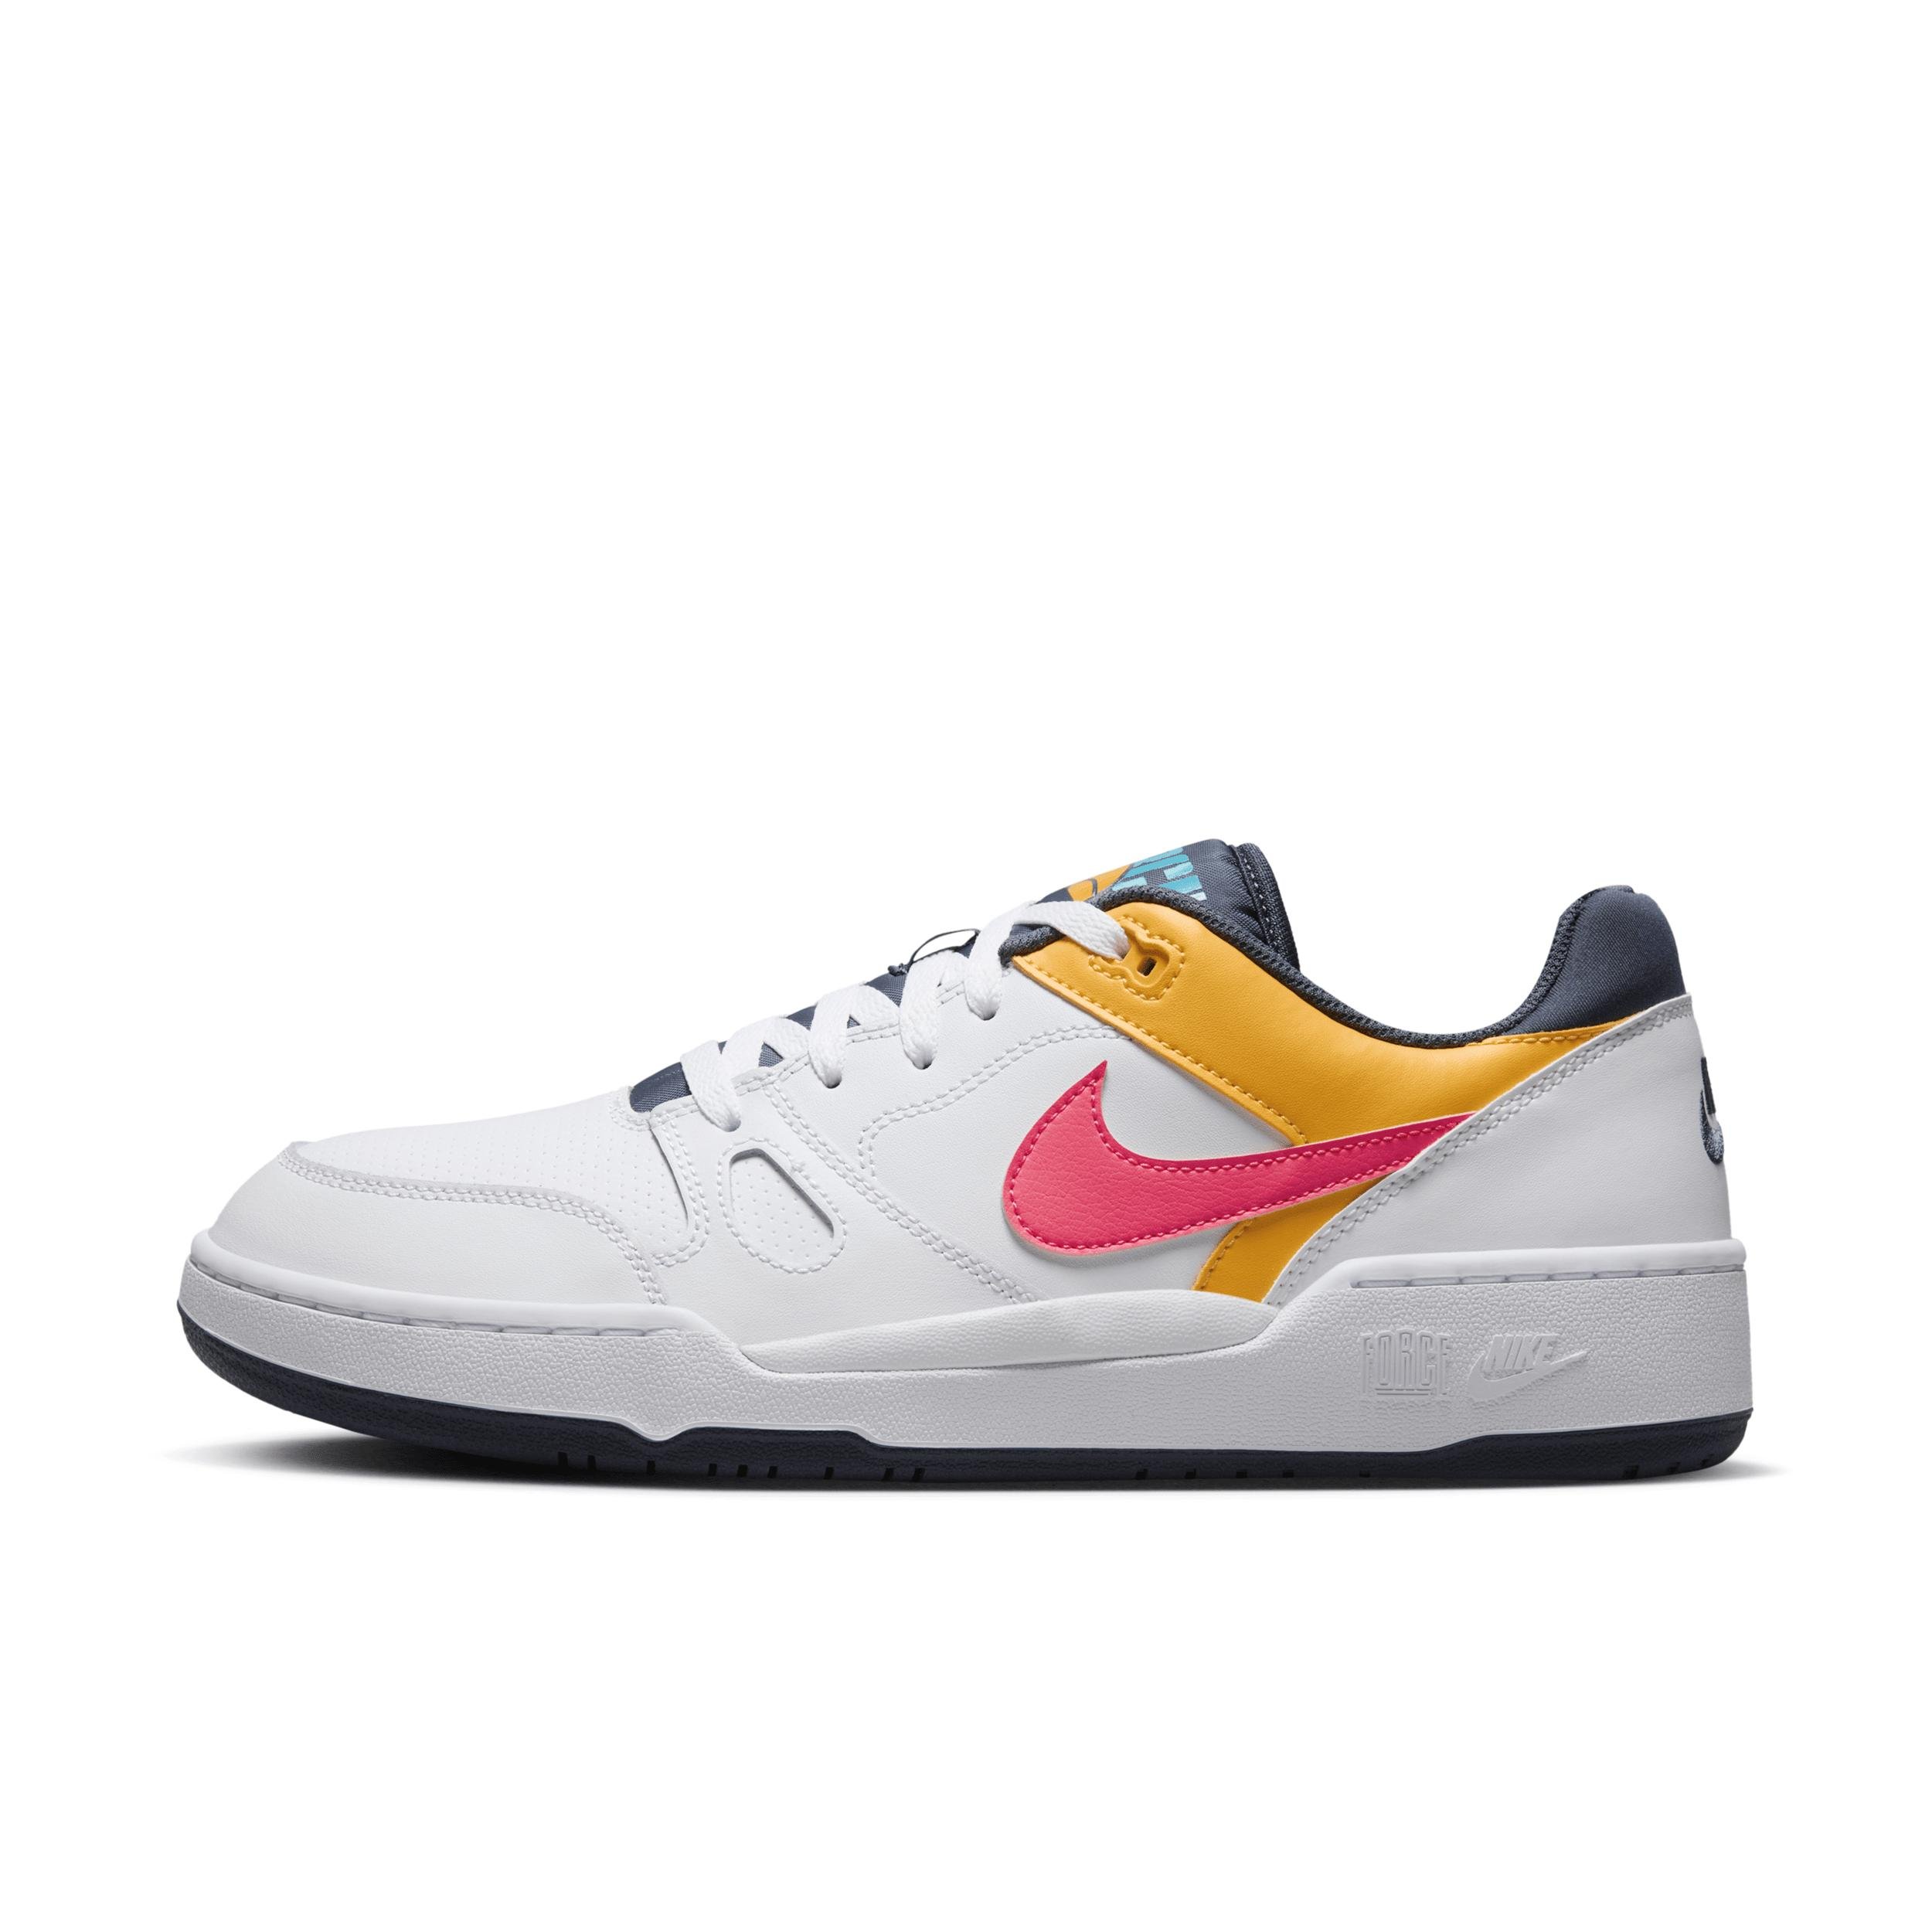 Nike Men's Full Force Low Shoes by NIKE